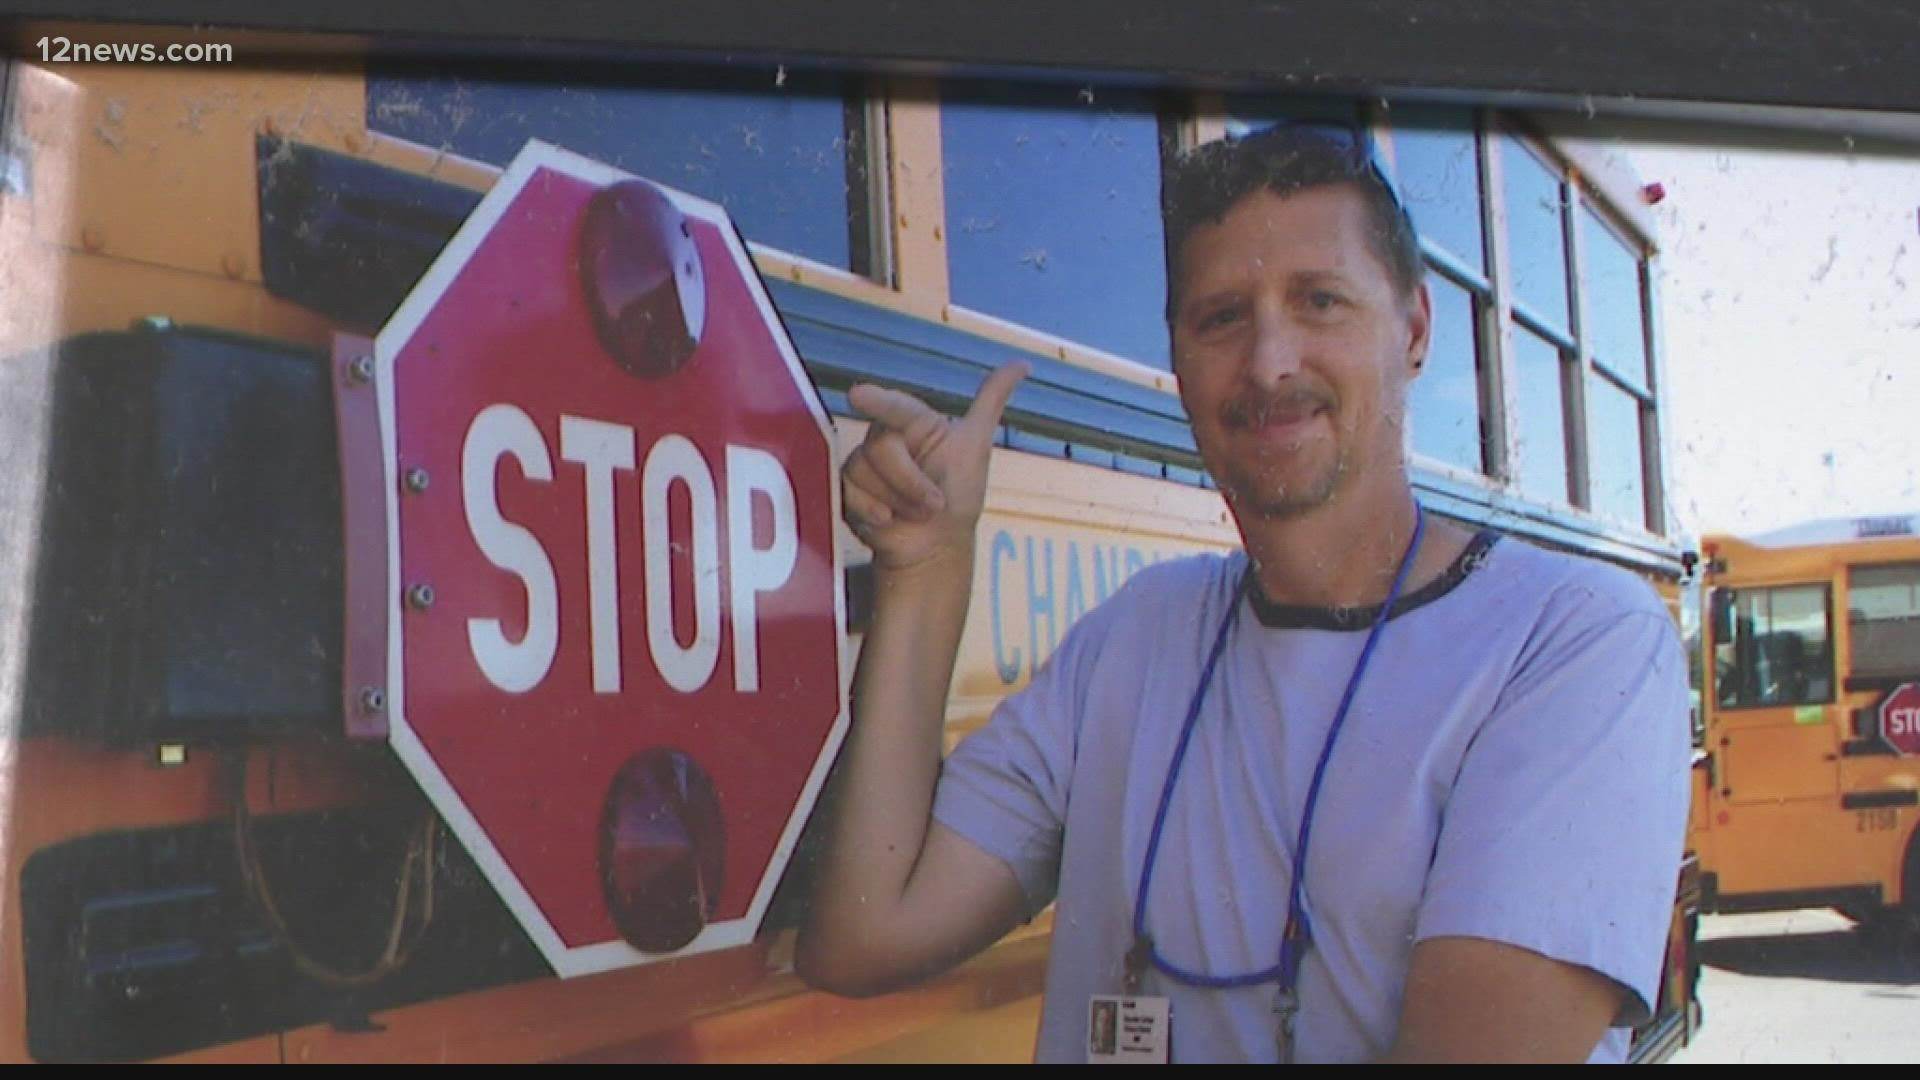 A Chandler school bus driver was arrested for DUI after he ran a red light and failed to stop for police. His wife says a tumor is likely the cause of the problem.